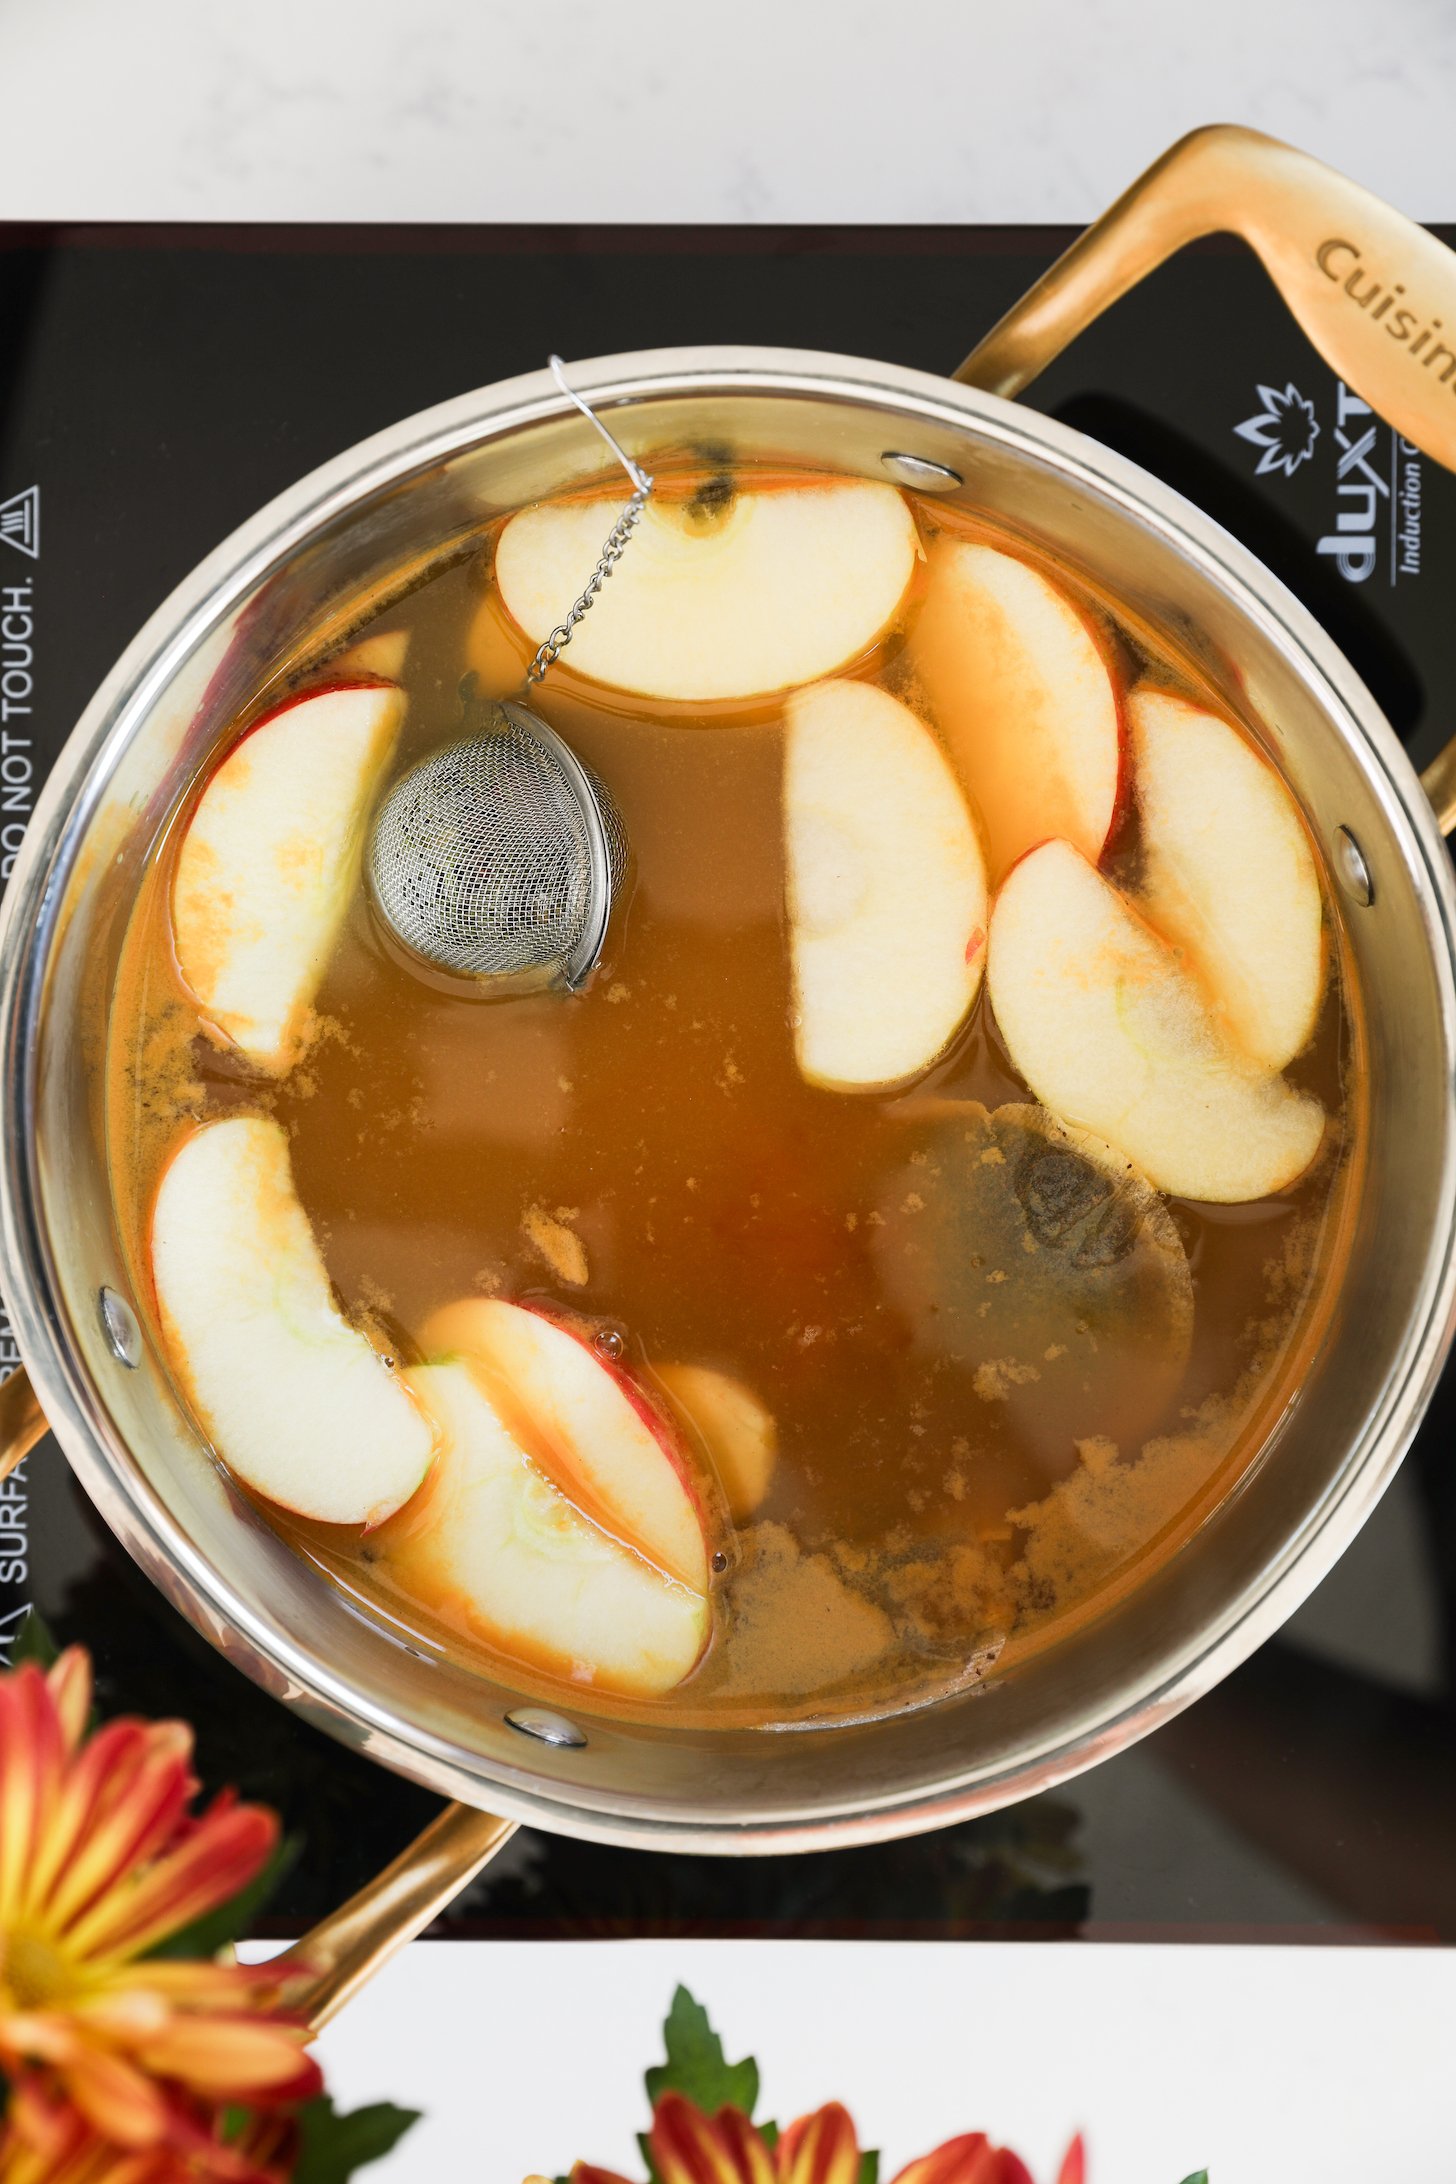 A cooking pot on a mobile cooktop holds apple cider, tea bags and apple slices, with a stainless steel spice infuser submerged.